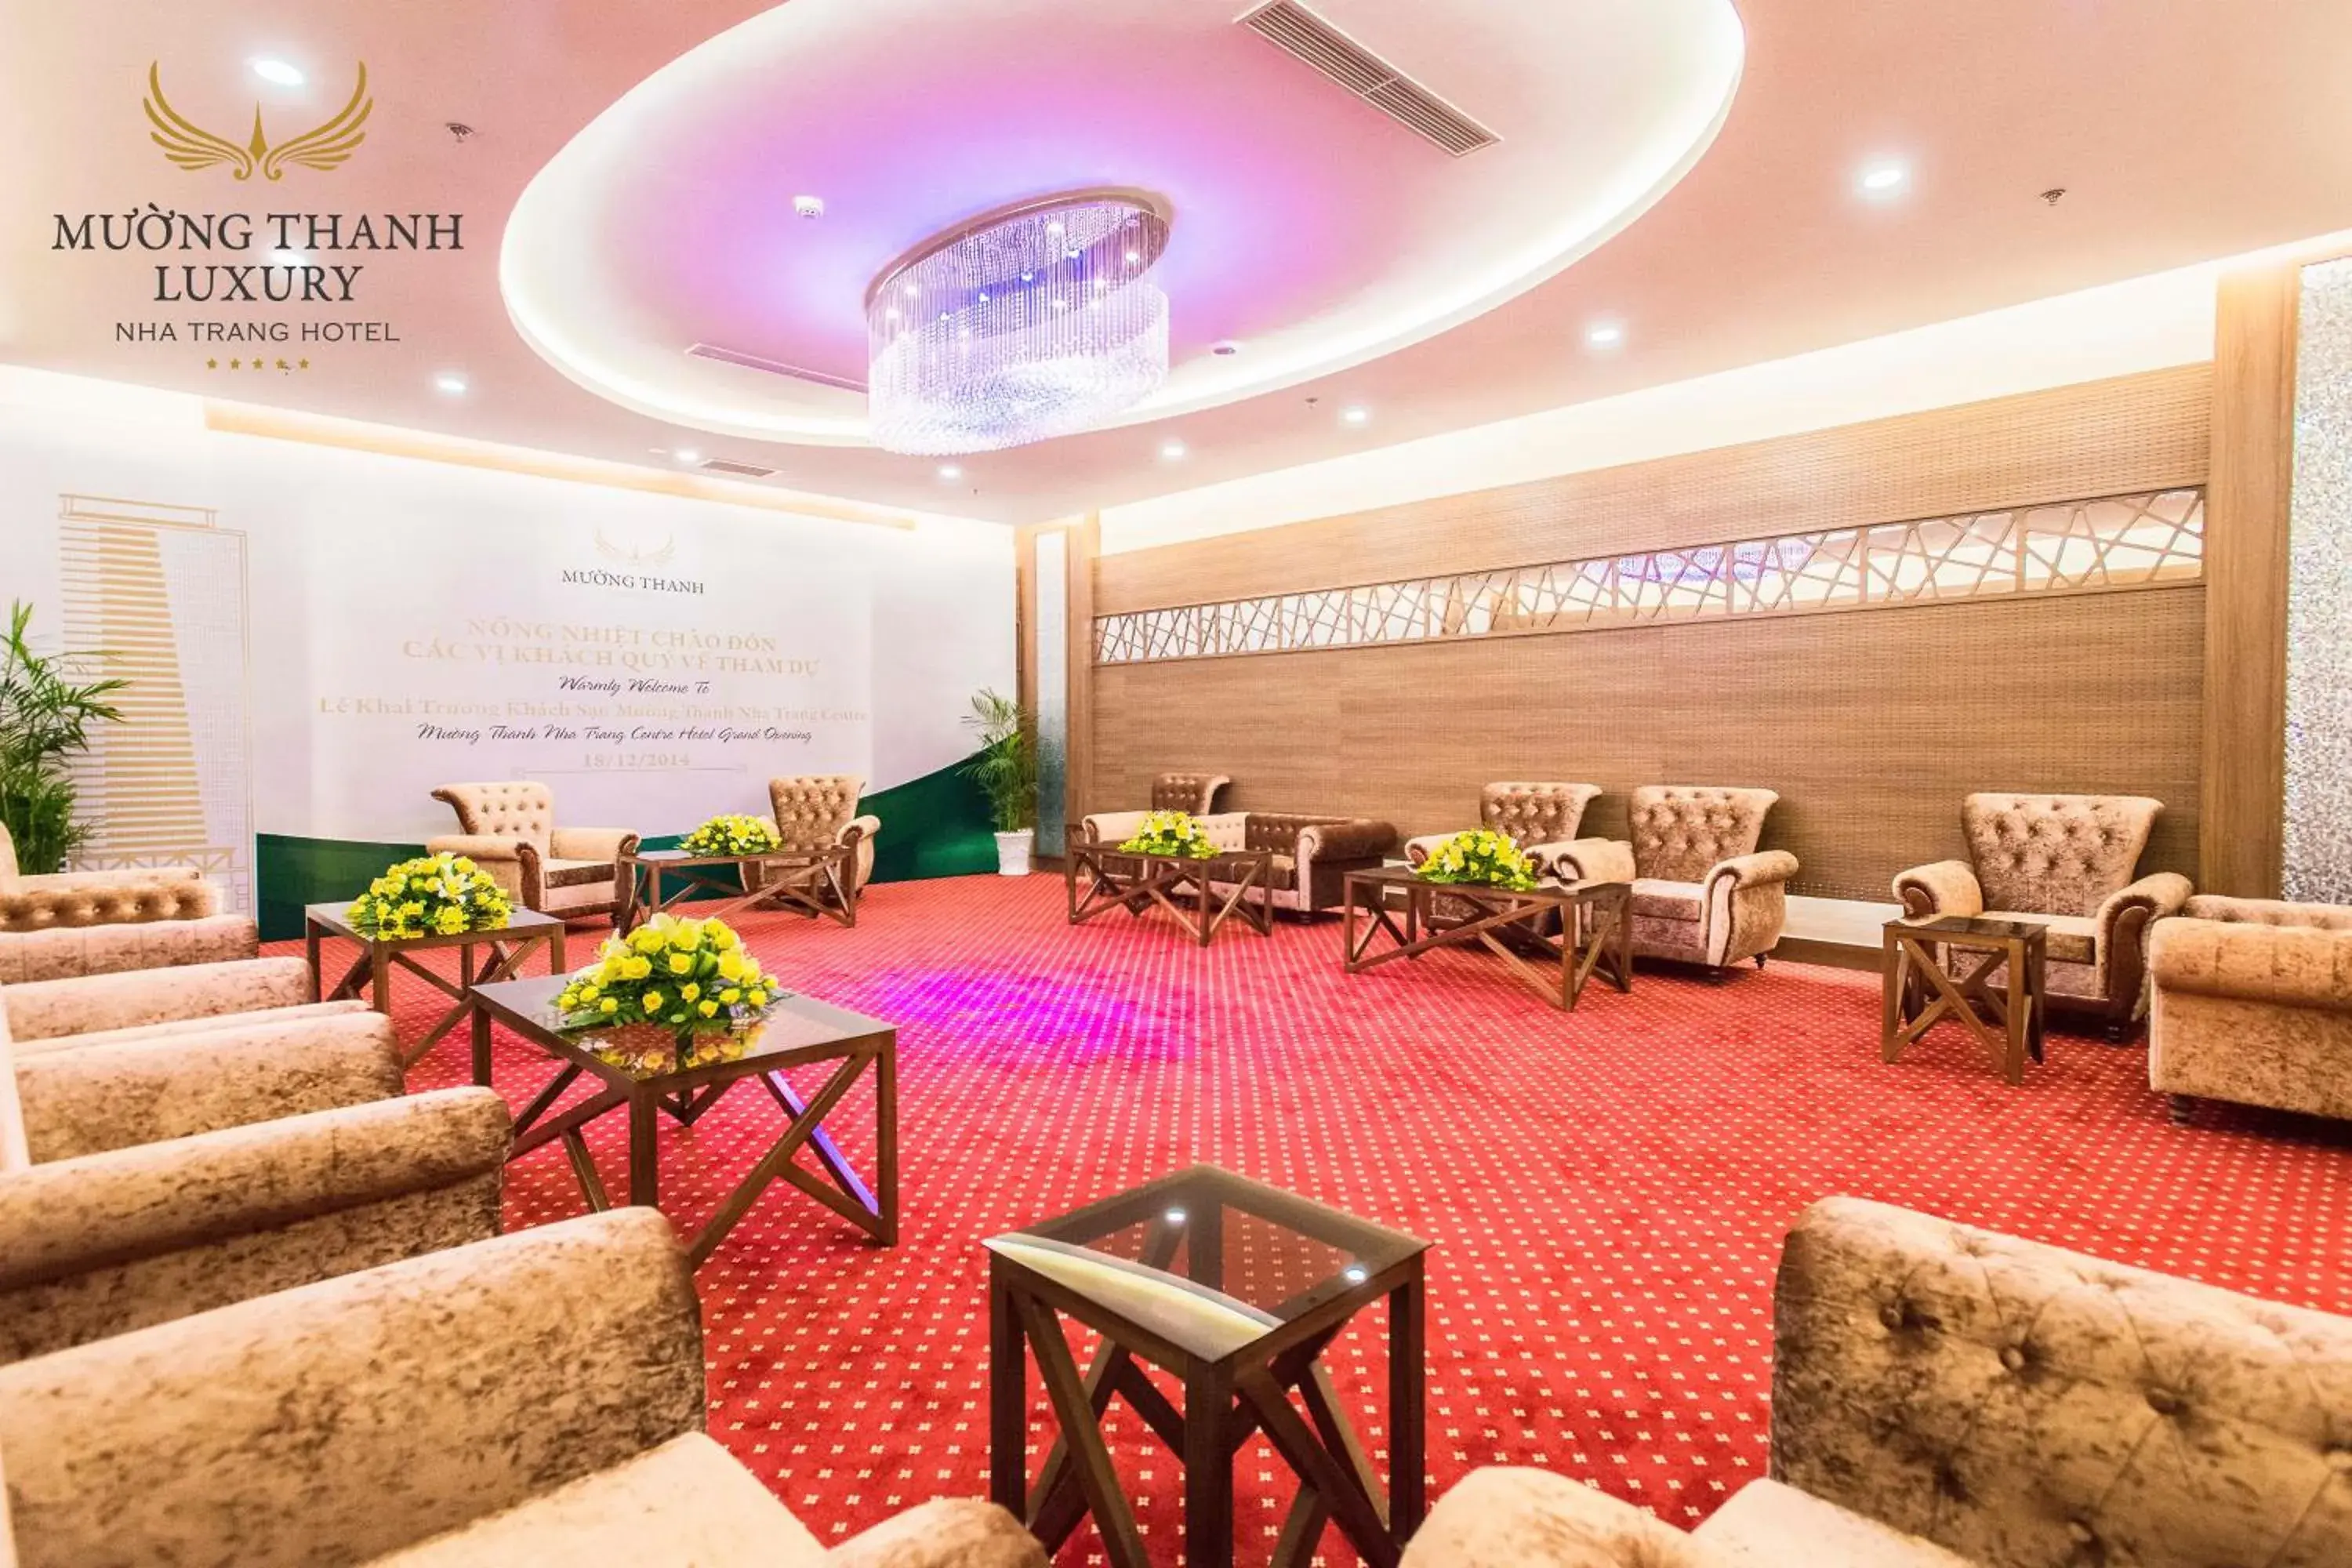 Property building in Muong Thanh Luxury Nha Trang Hotel